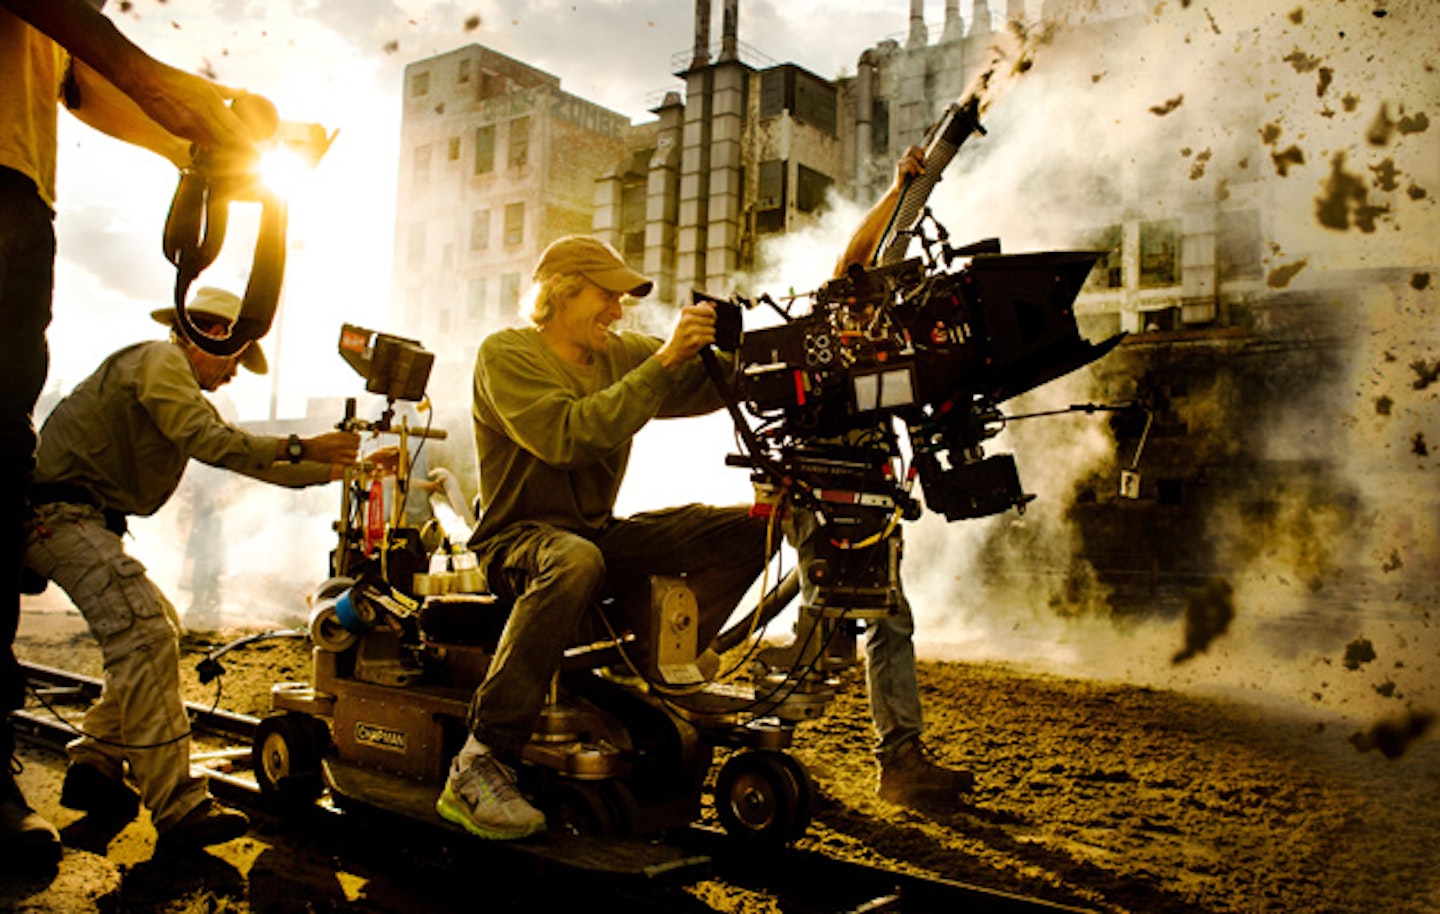 Transformers: Age Of Extinction, Michael Bay